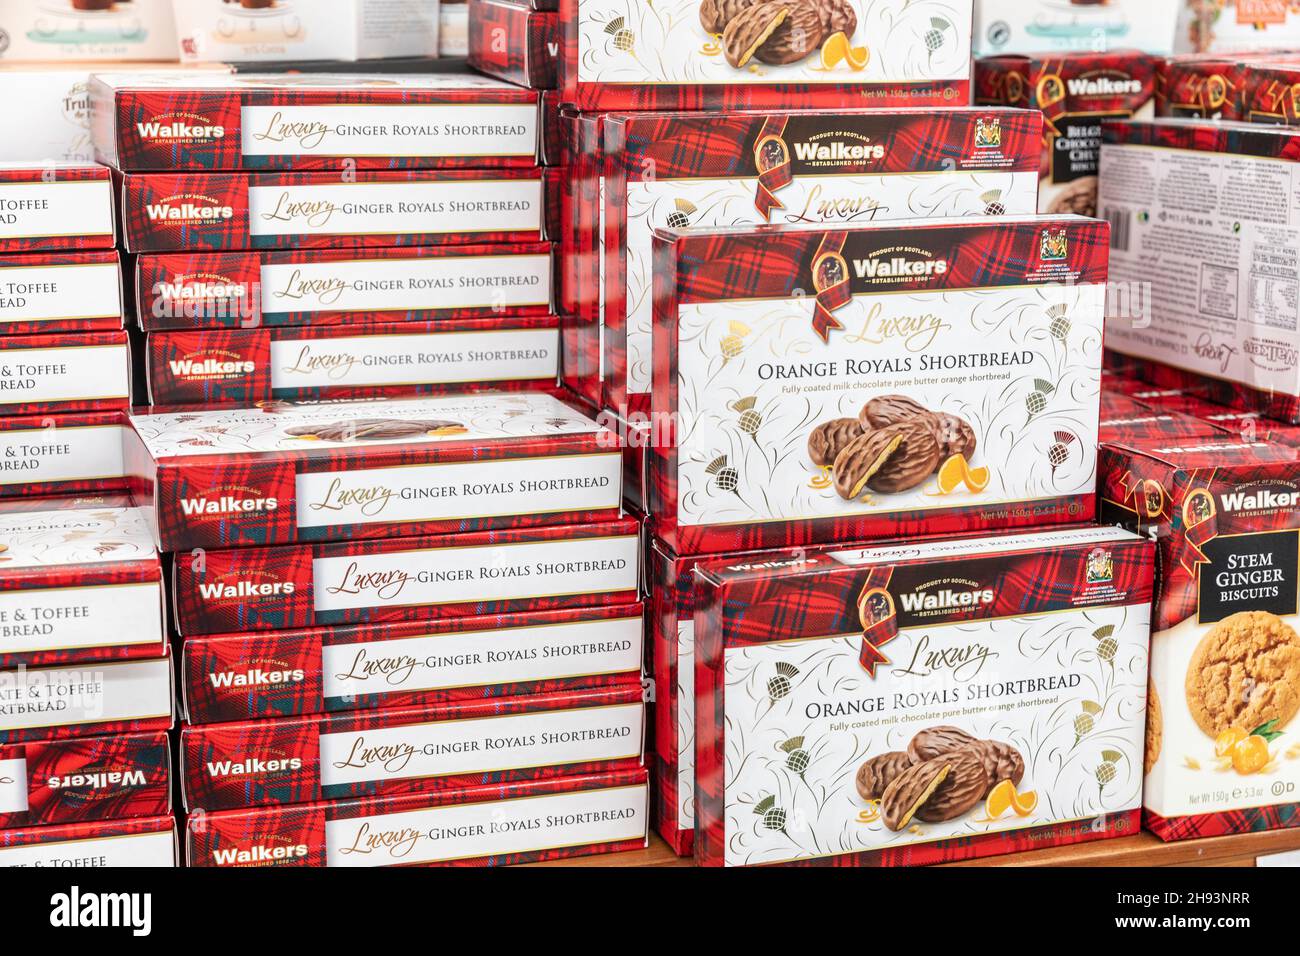 Walkers shortbread and ginger royals and orange royals shortbread for sale  in an australian supermarket prior to Christmas Stock Photo - Alamy